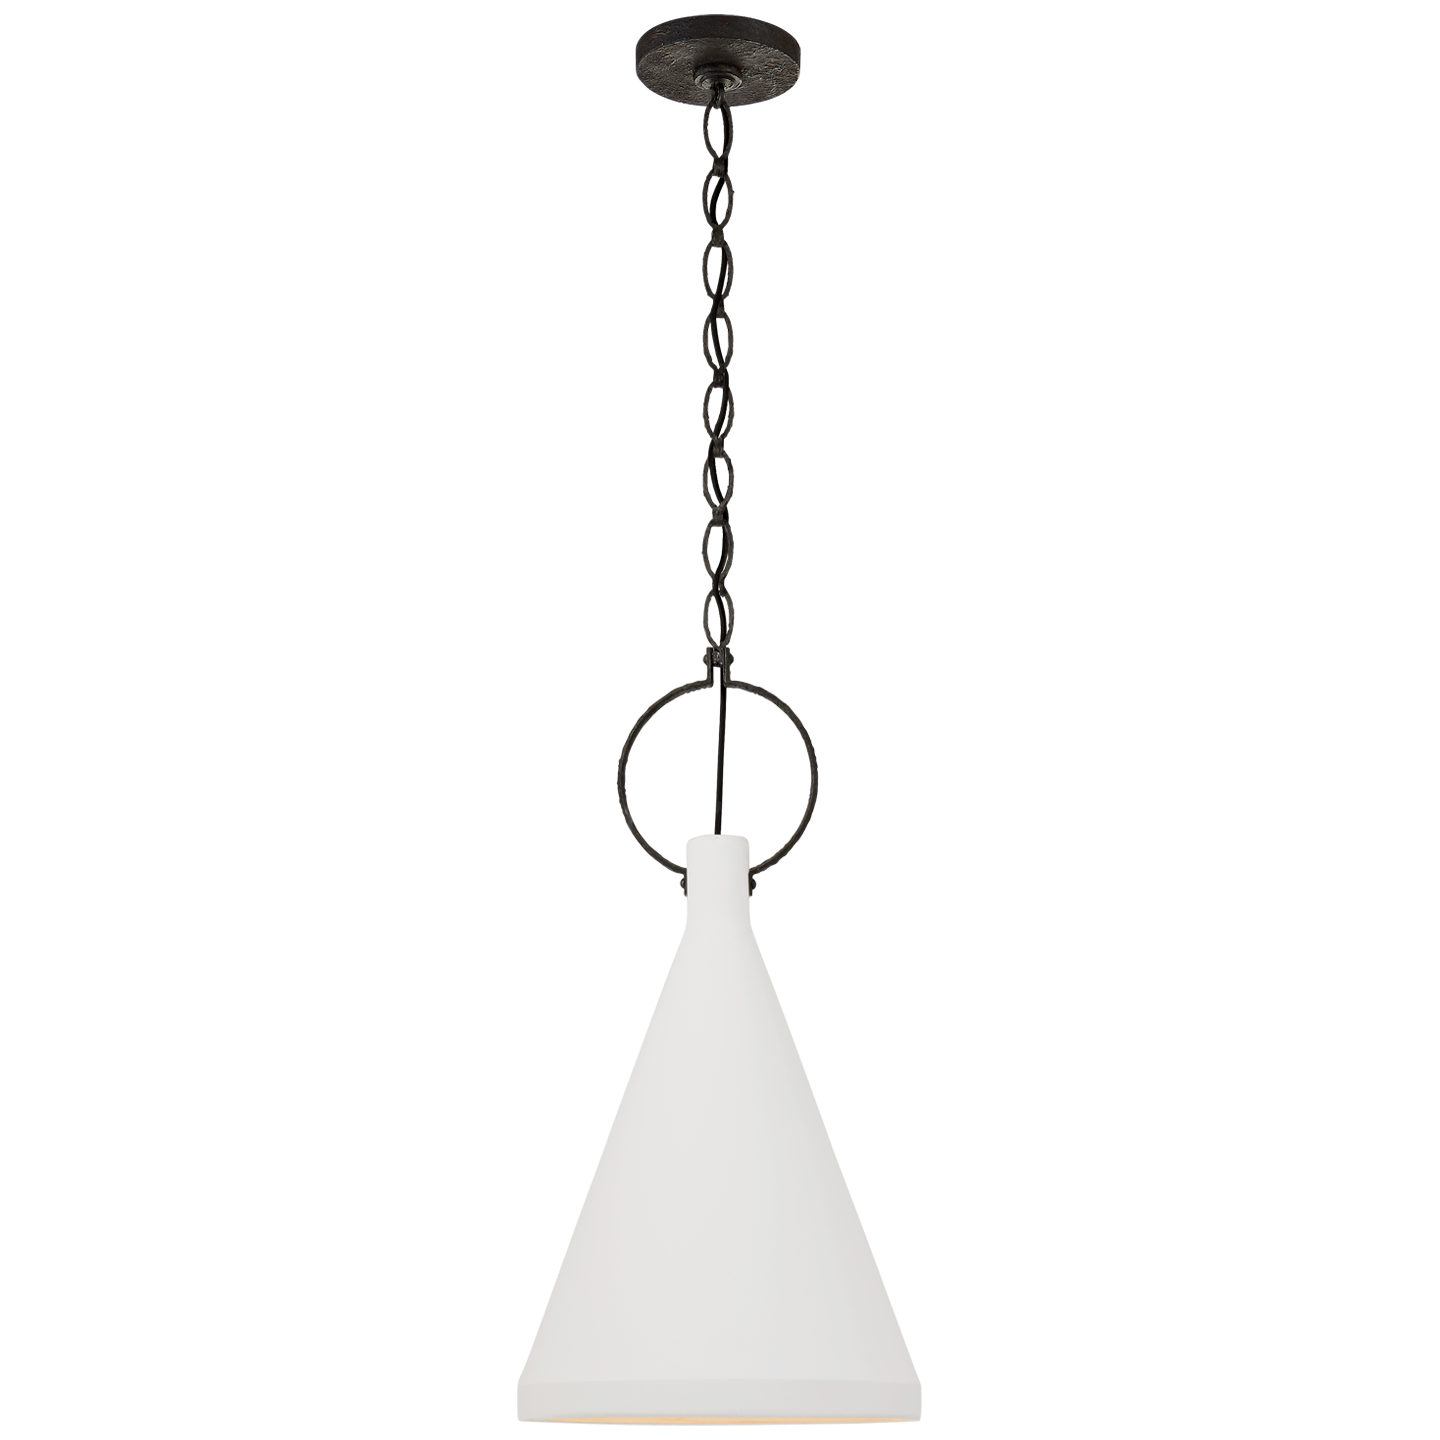 We love the finish on this Limoges Tall Pendant by Visual Comfort. This would look gorgeous over a kitchen island, kitchen sink, or other area needing extra light.   Designer: Suzanne Kasler   Height: 25.75" Width: 13.5" Canopy: 5.5" Round Socket: E26 Keyless Wattage: 60 A19 Weight: 6 Pounds